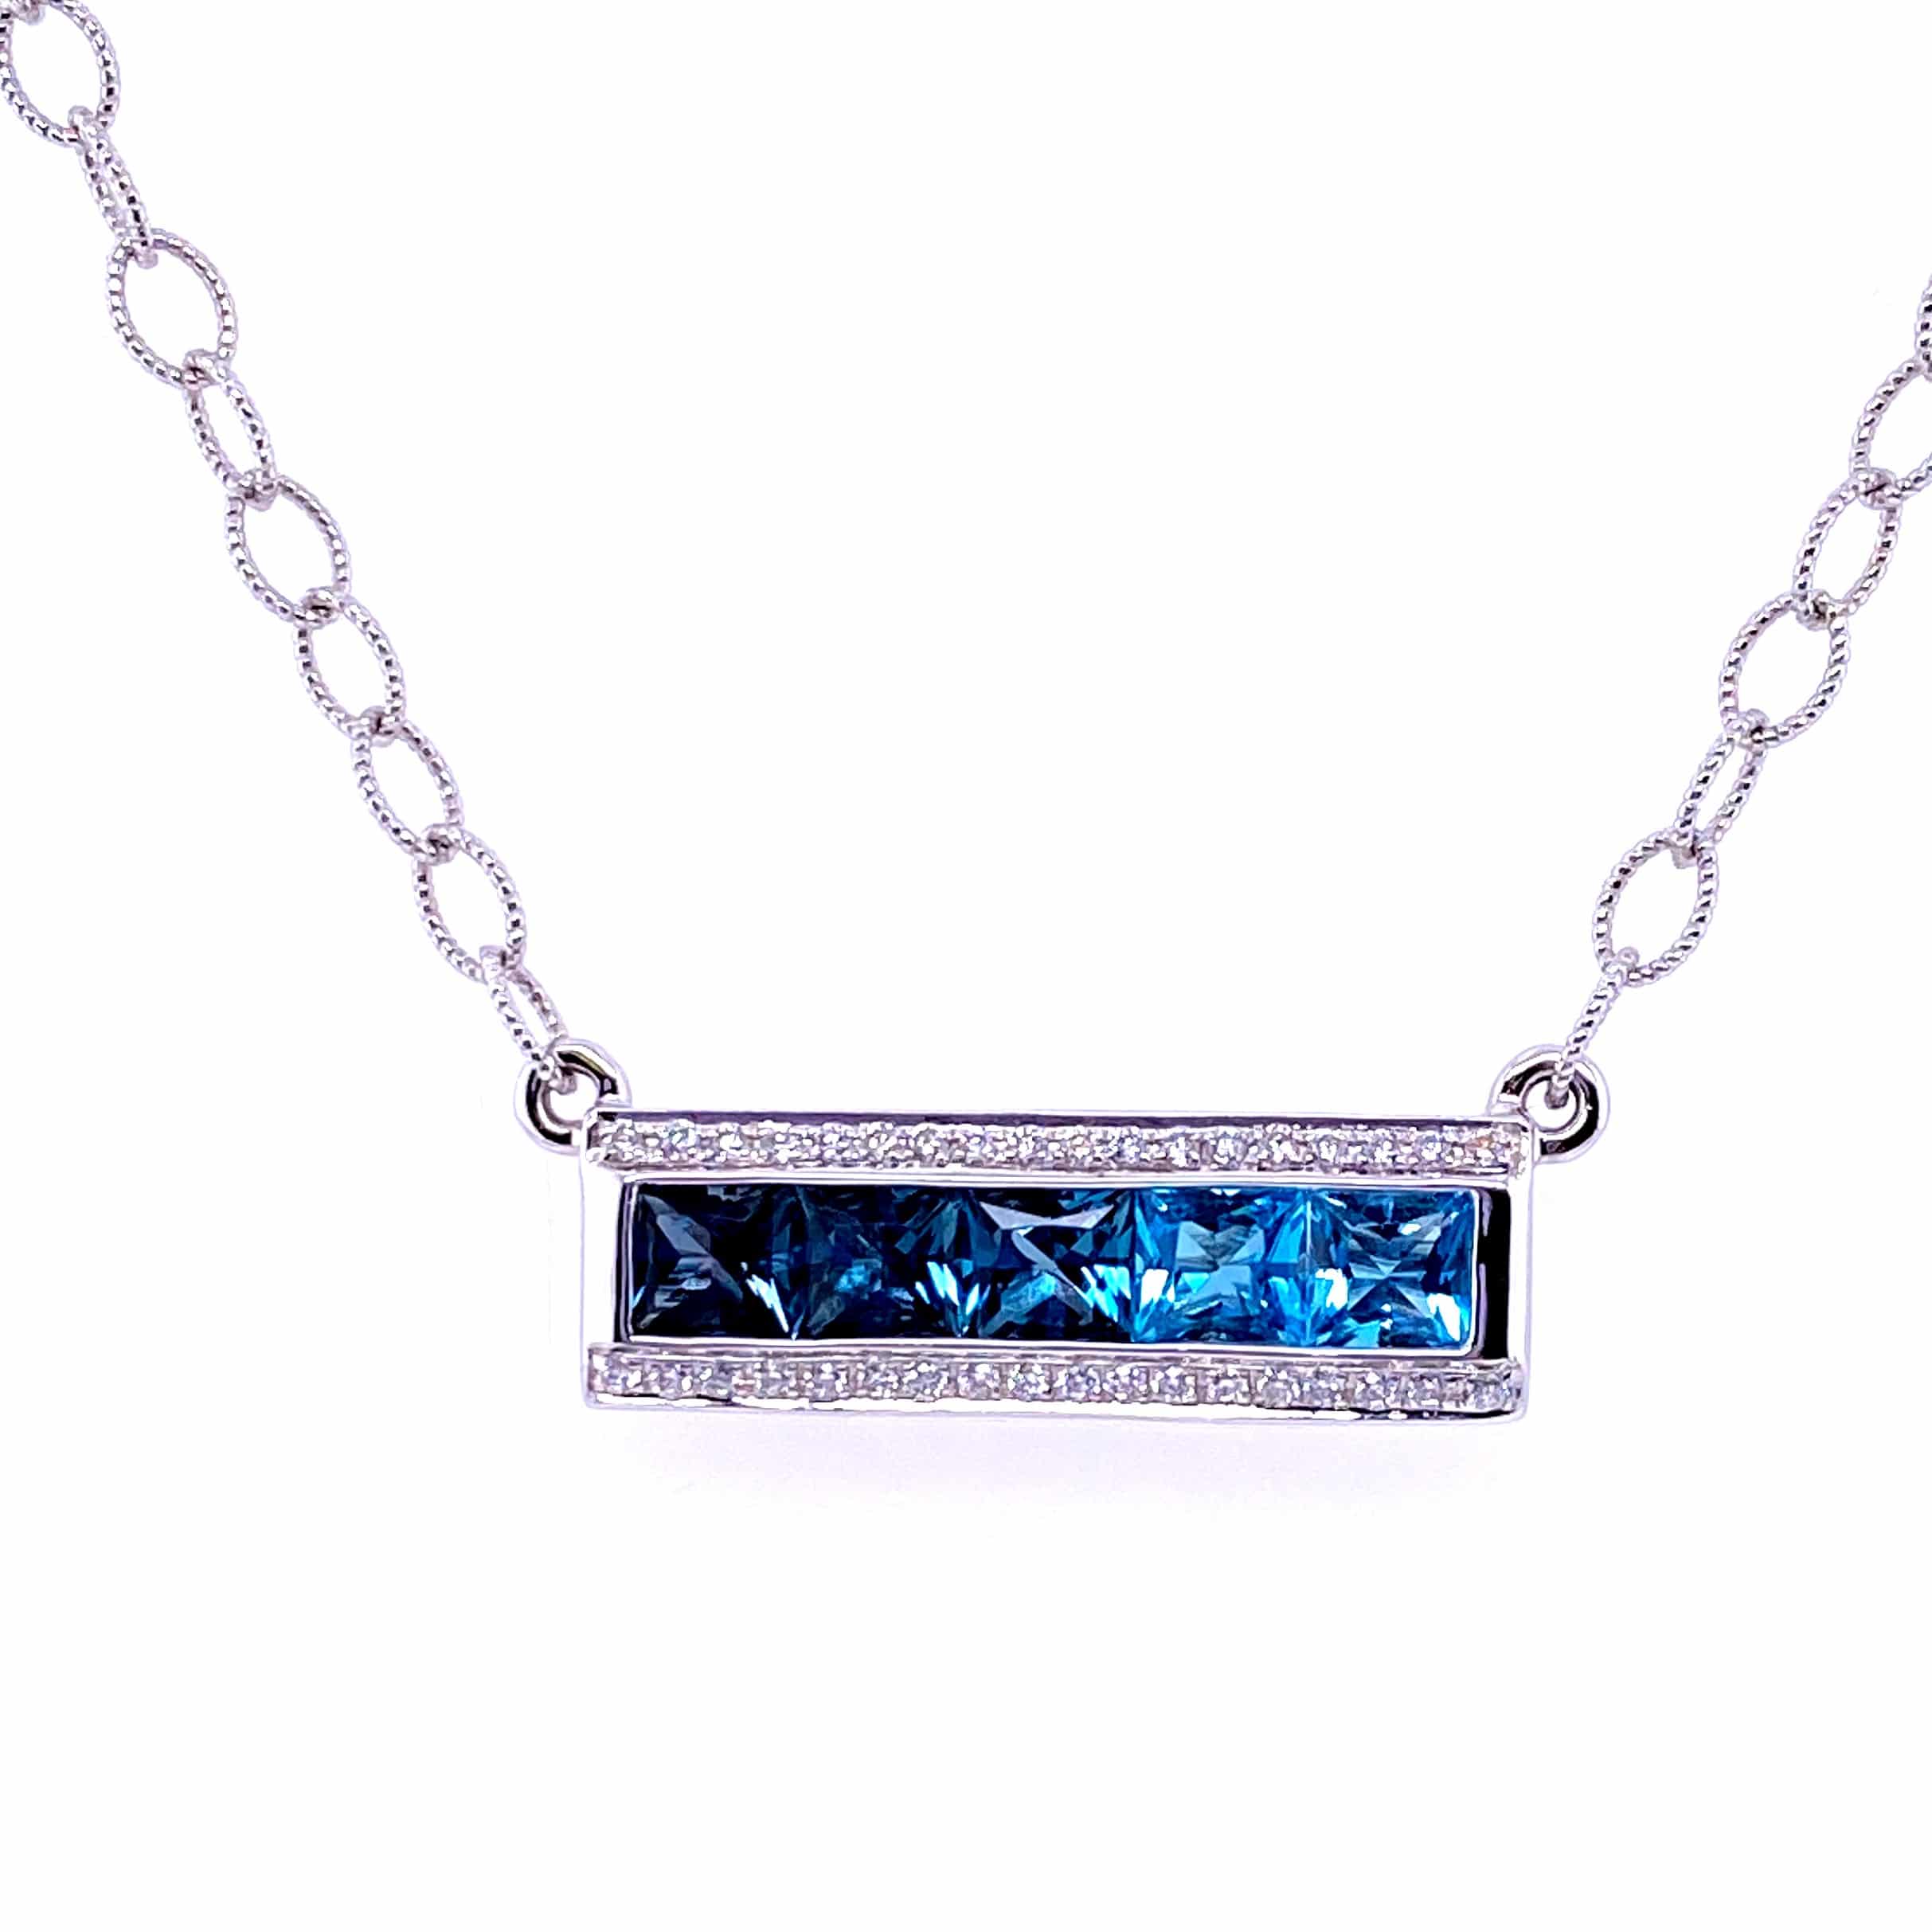 Blue Topaz and Diamond Necklace by Bellarri - Nelson Coleman Jewelers